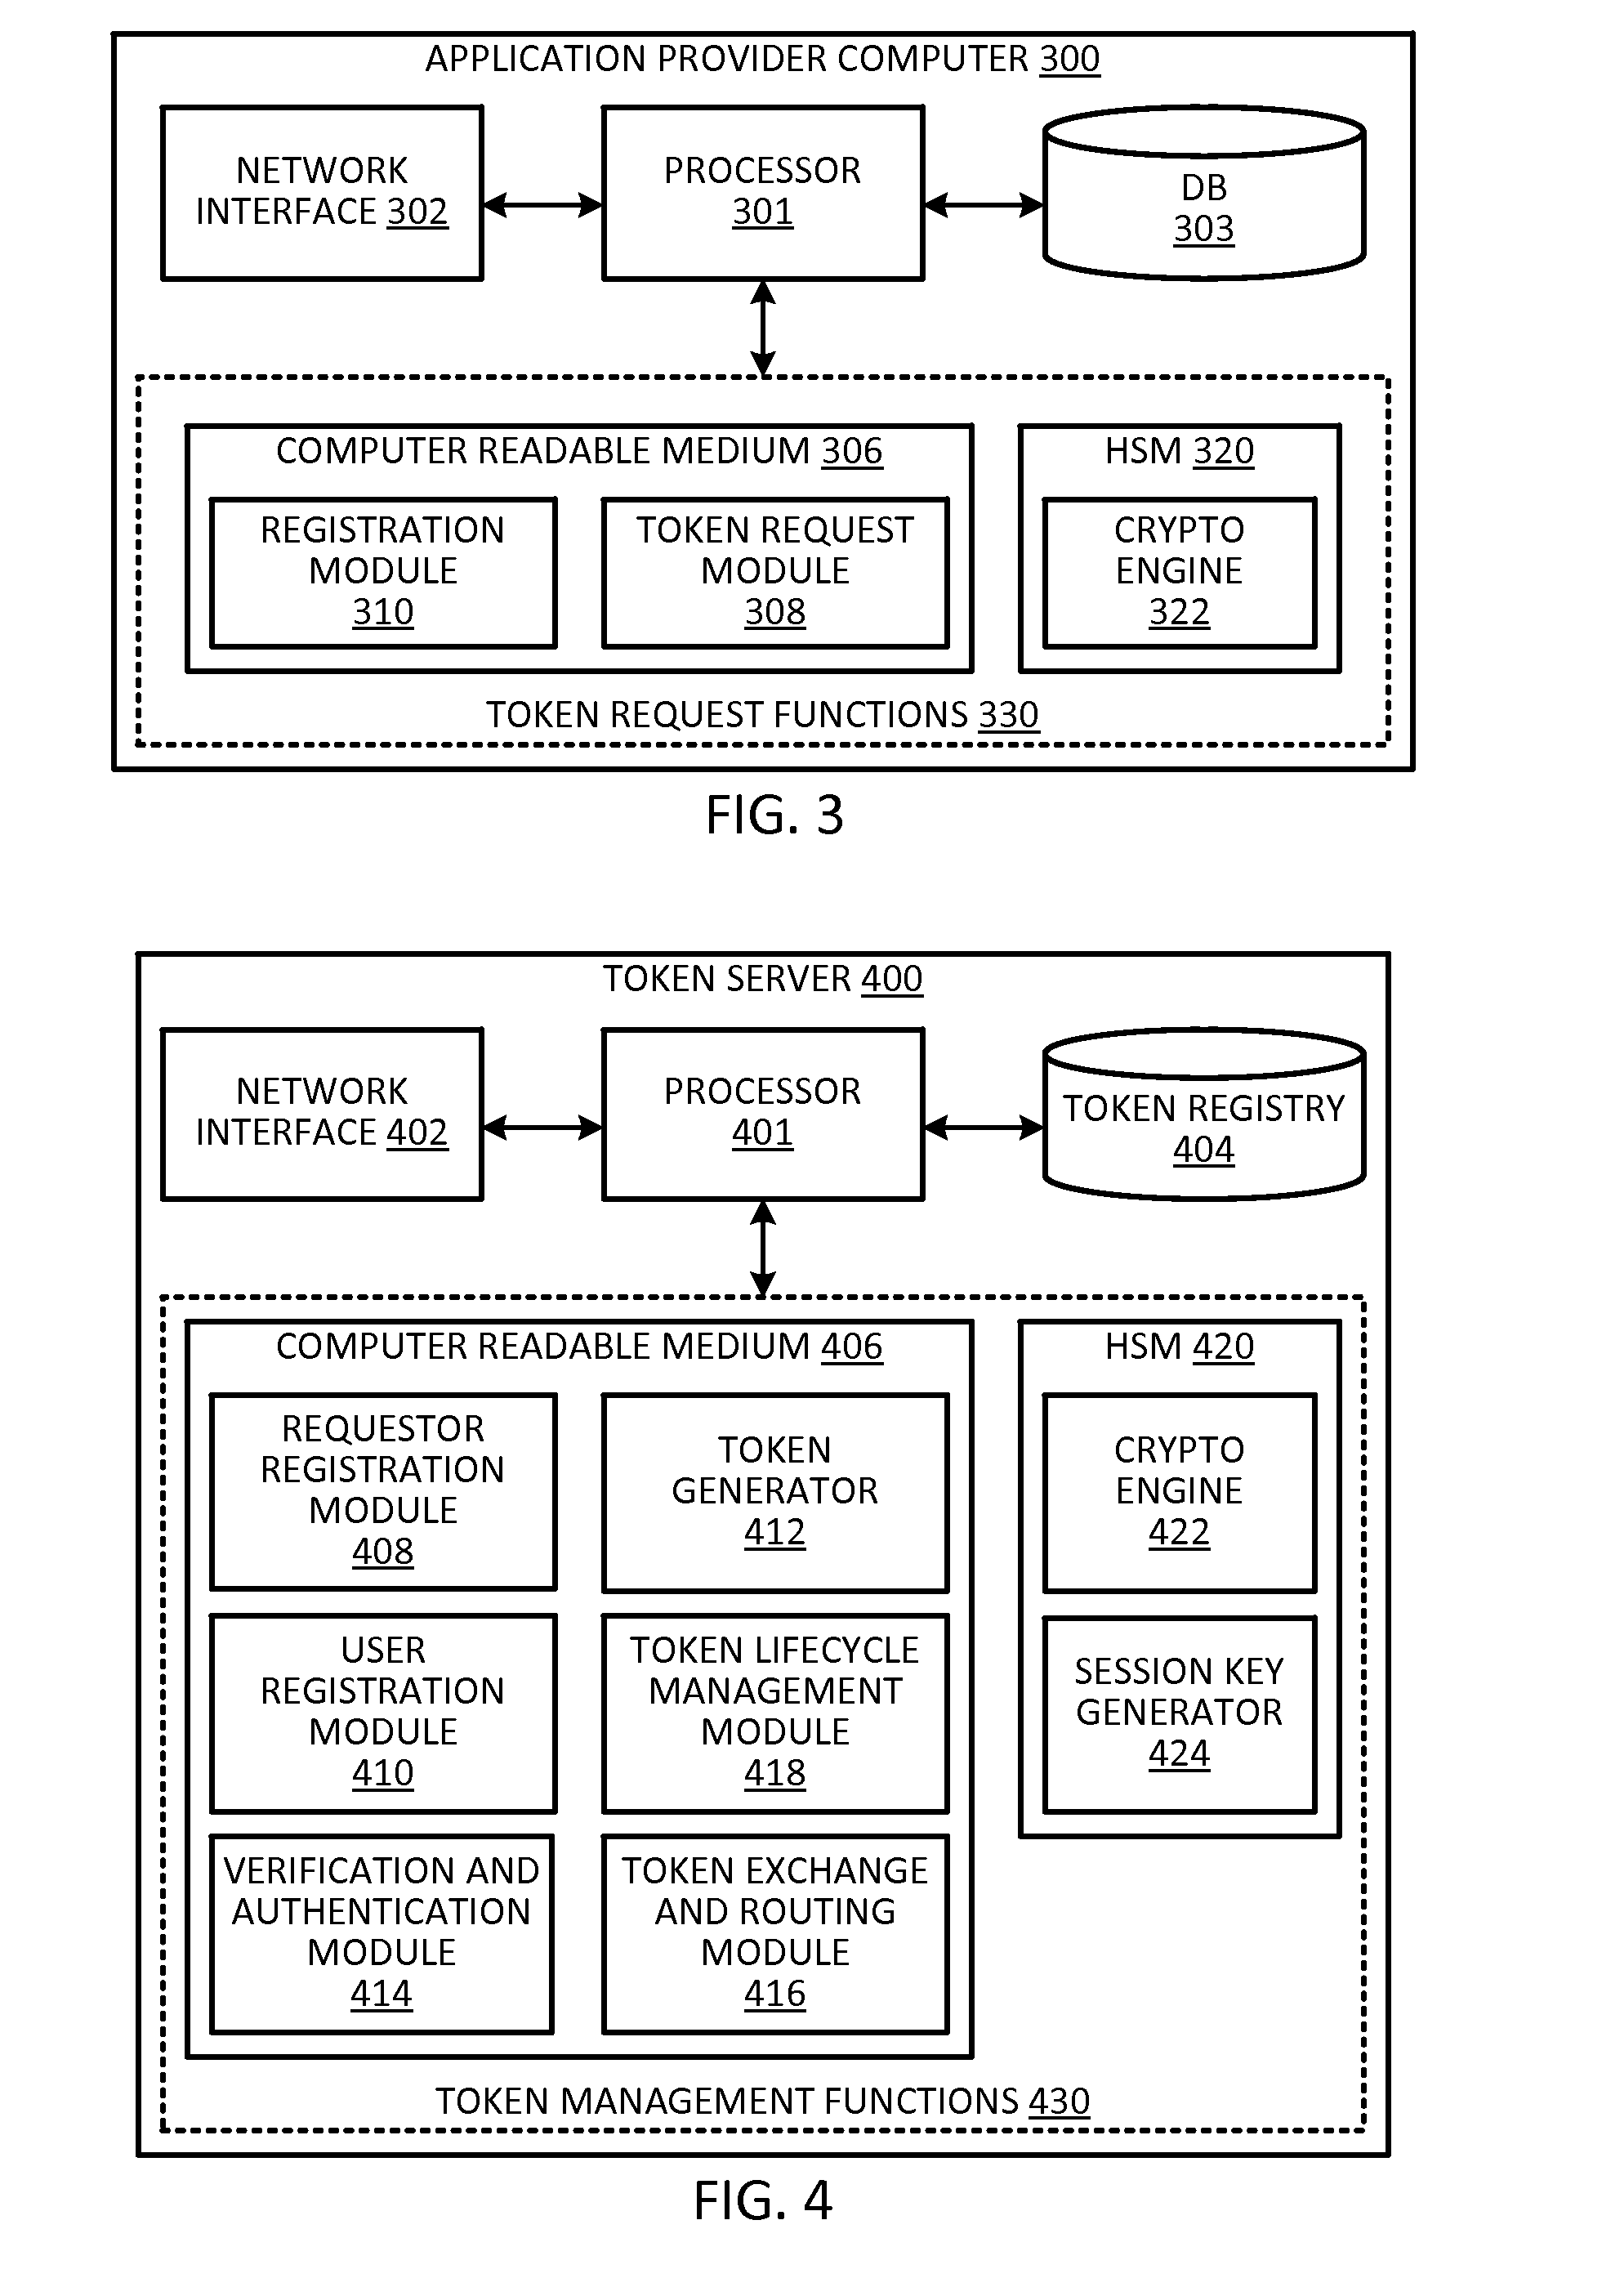 Token security on a communication device